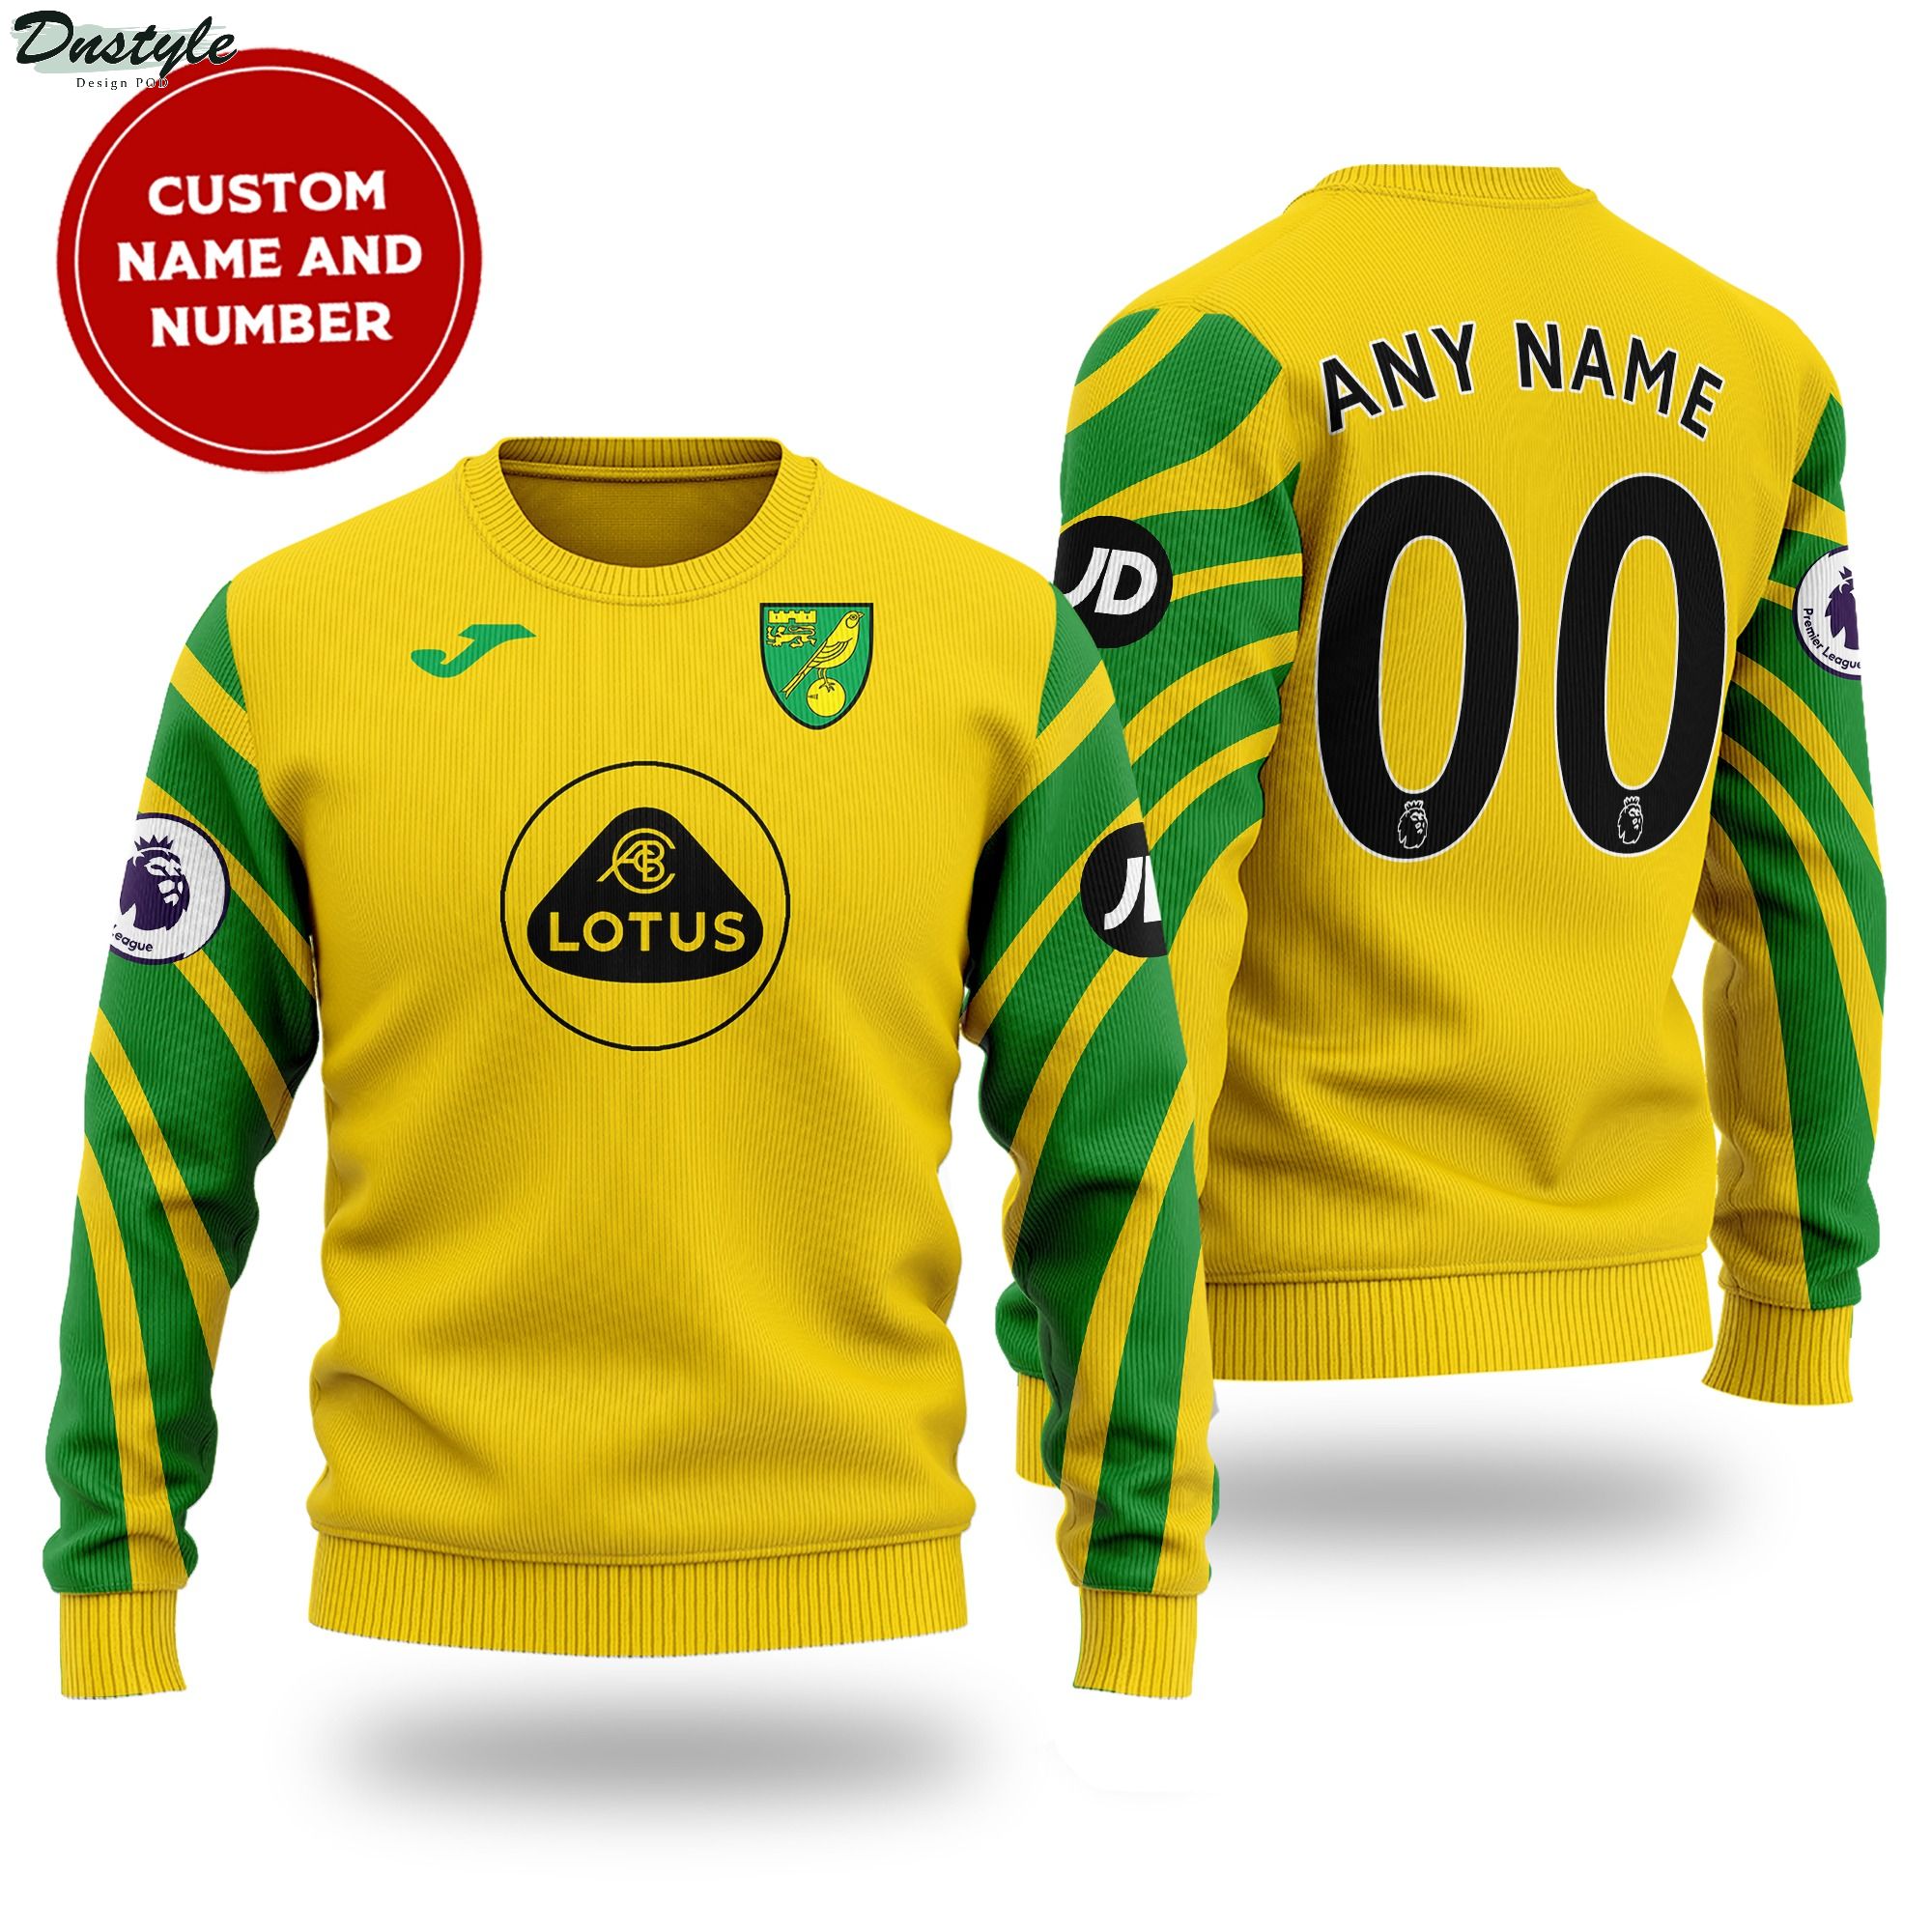 Norwich City custom name and number ugly sweater